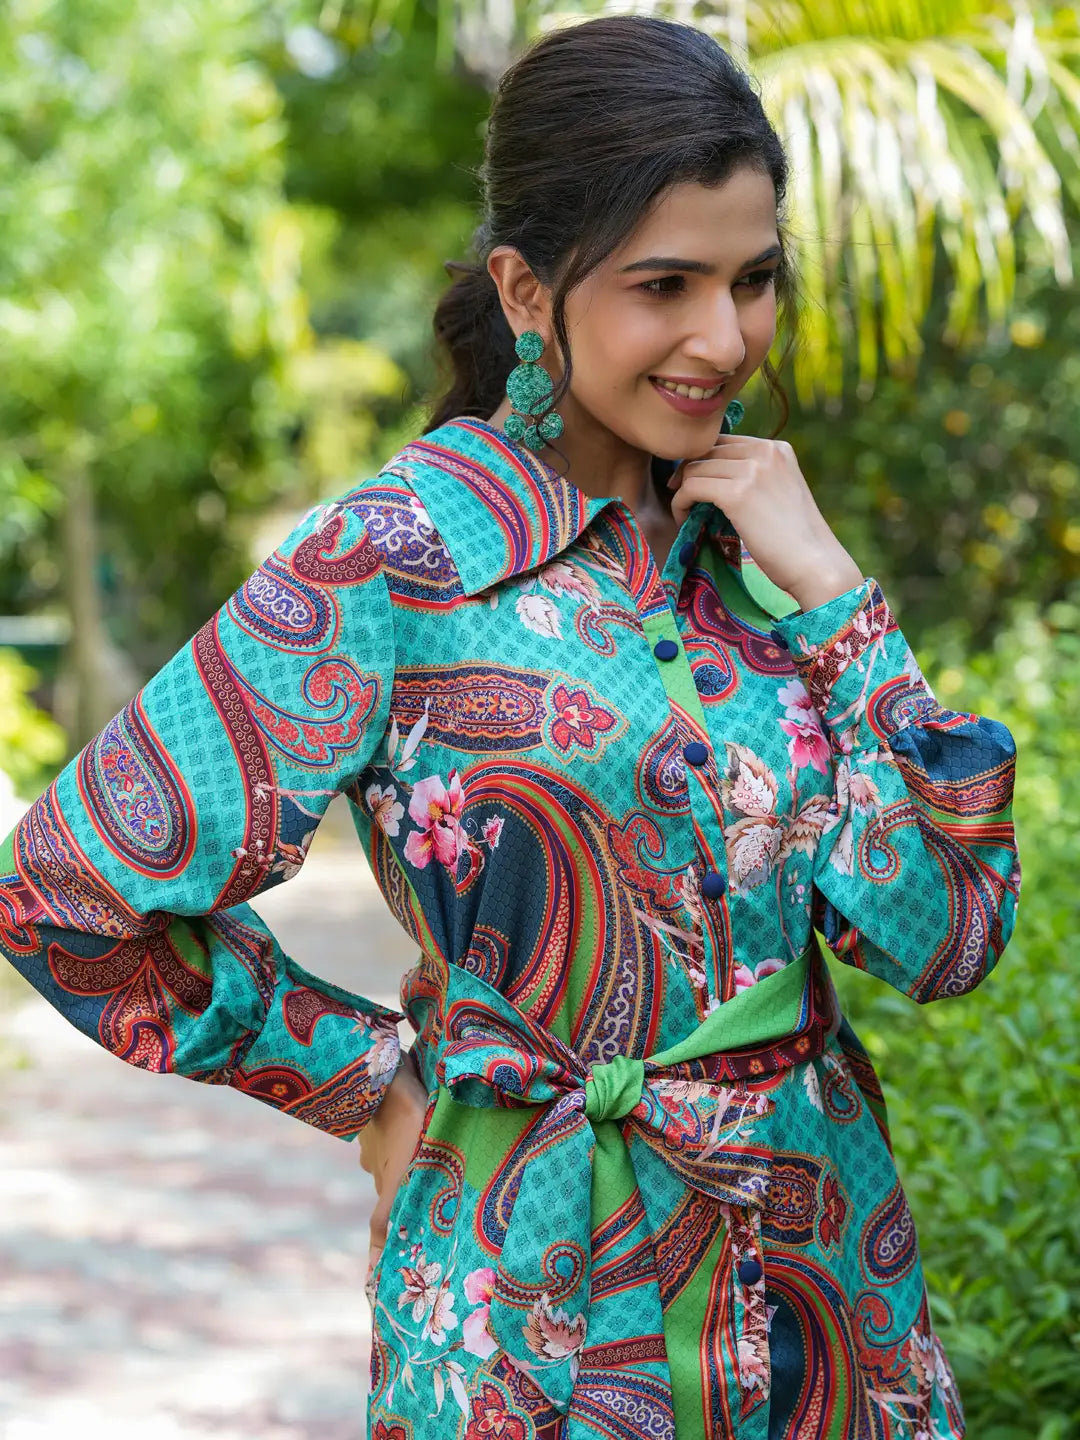 Green and Turquoise Blue Printed Satin Shirt with Trousers Co-Ords-Yufta Store-1439CRDGRS